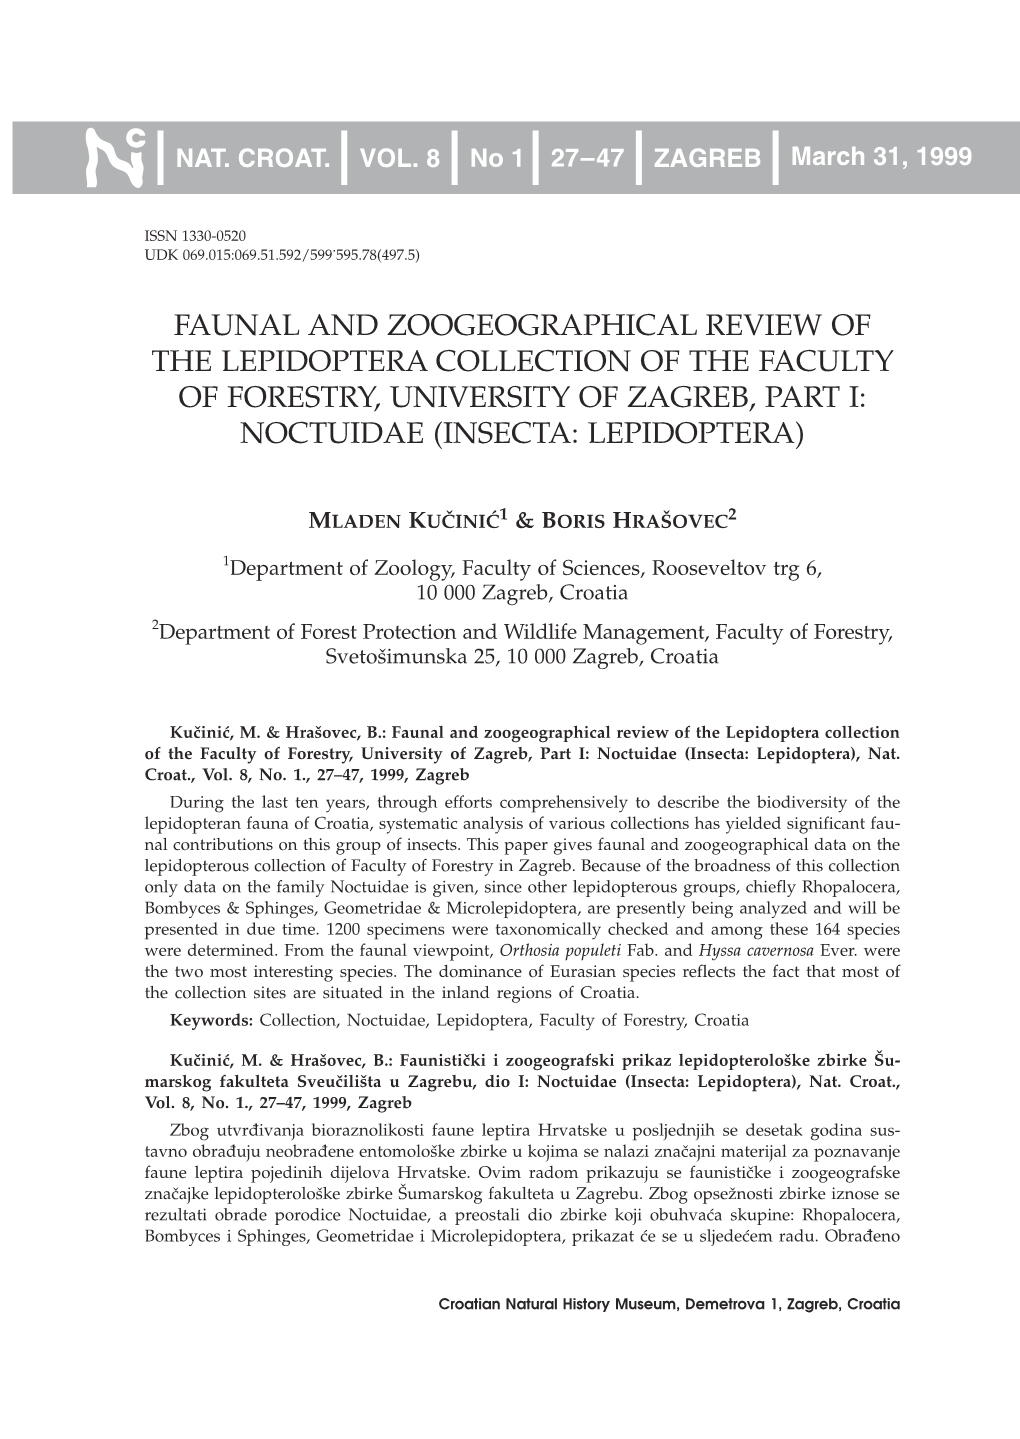 Faunal and Zoogeographical Review of the Lepidoptera Collection of the Faculty of Forestry, University of Zagreb, Part I: Noctuidae (Insecta: Lepidoptera)